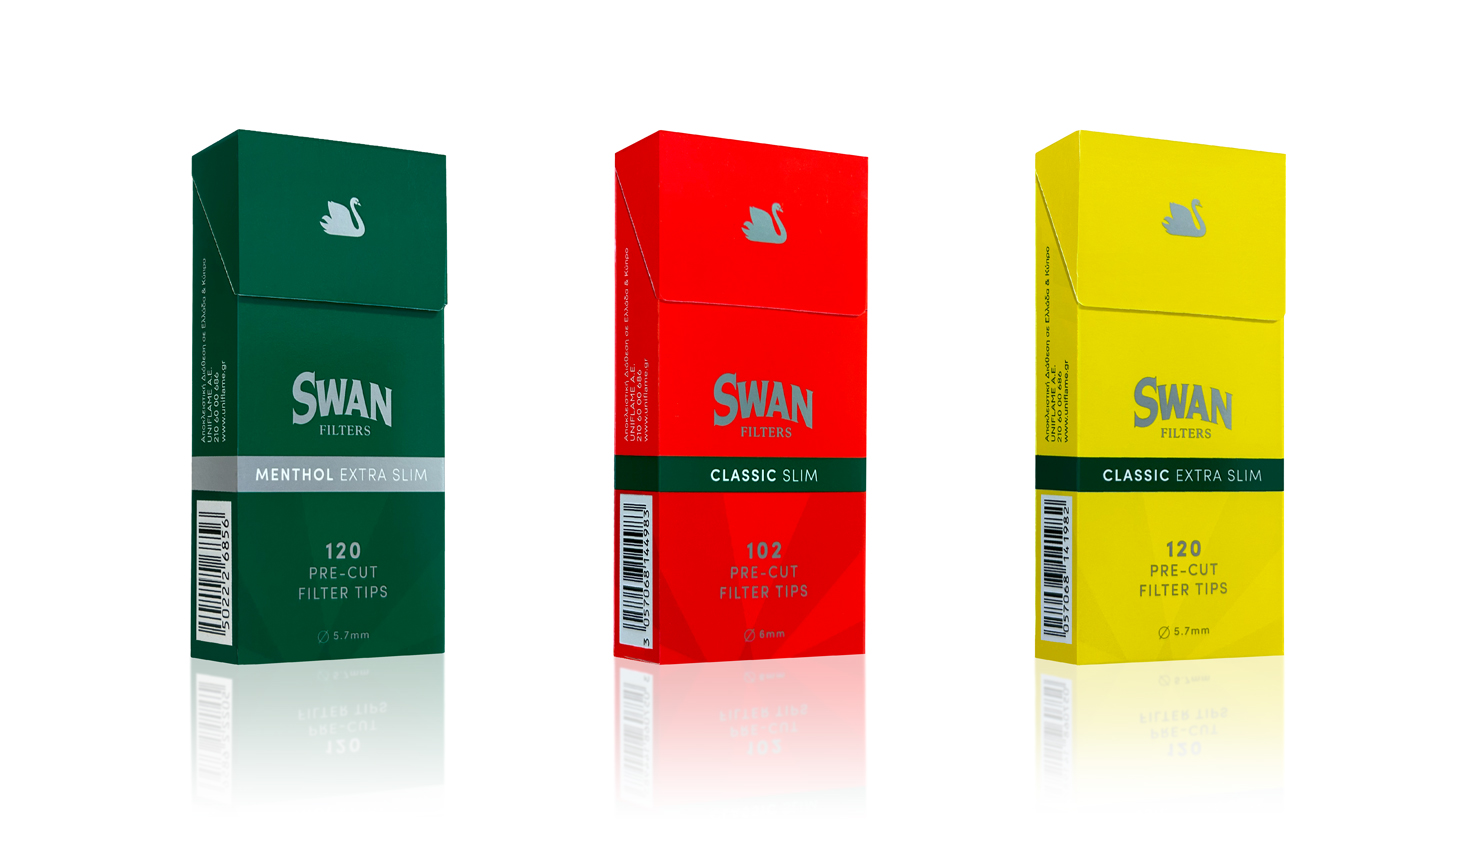 SWAN Menthol extra slim, Classic slim and Classic extra slim TOBACCO PRODUCTS